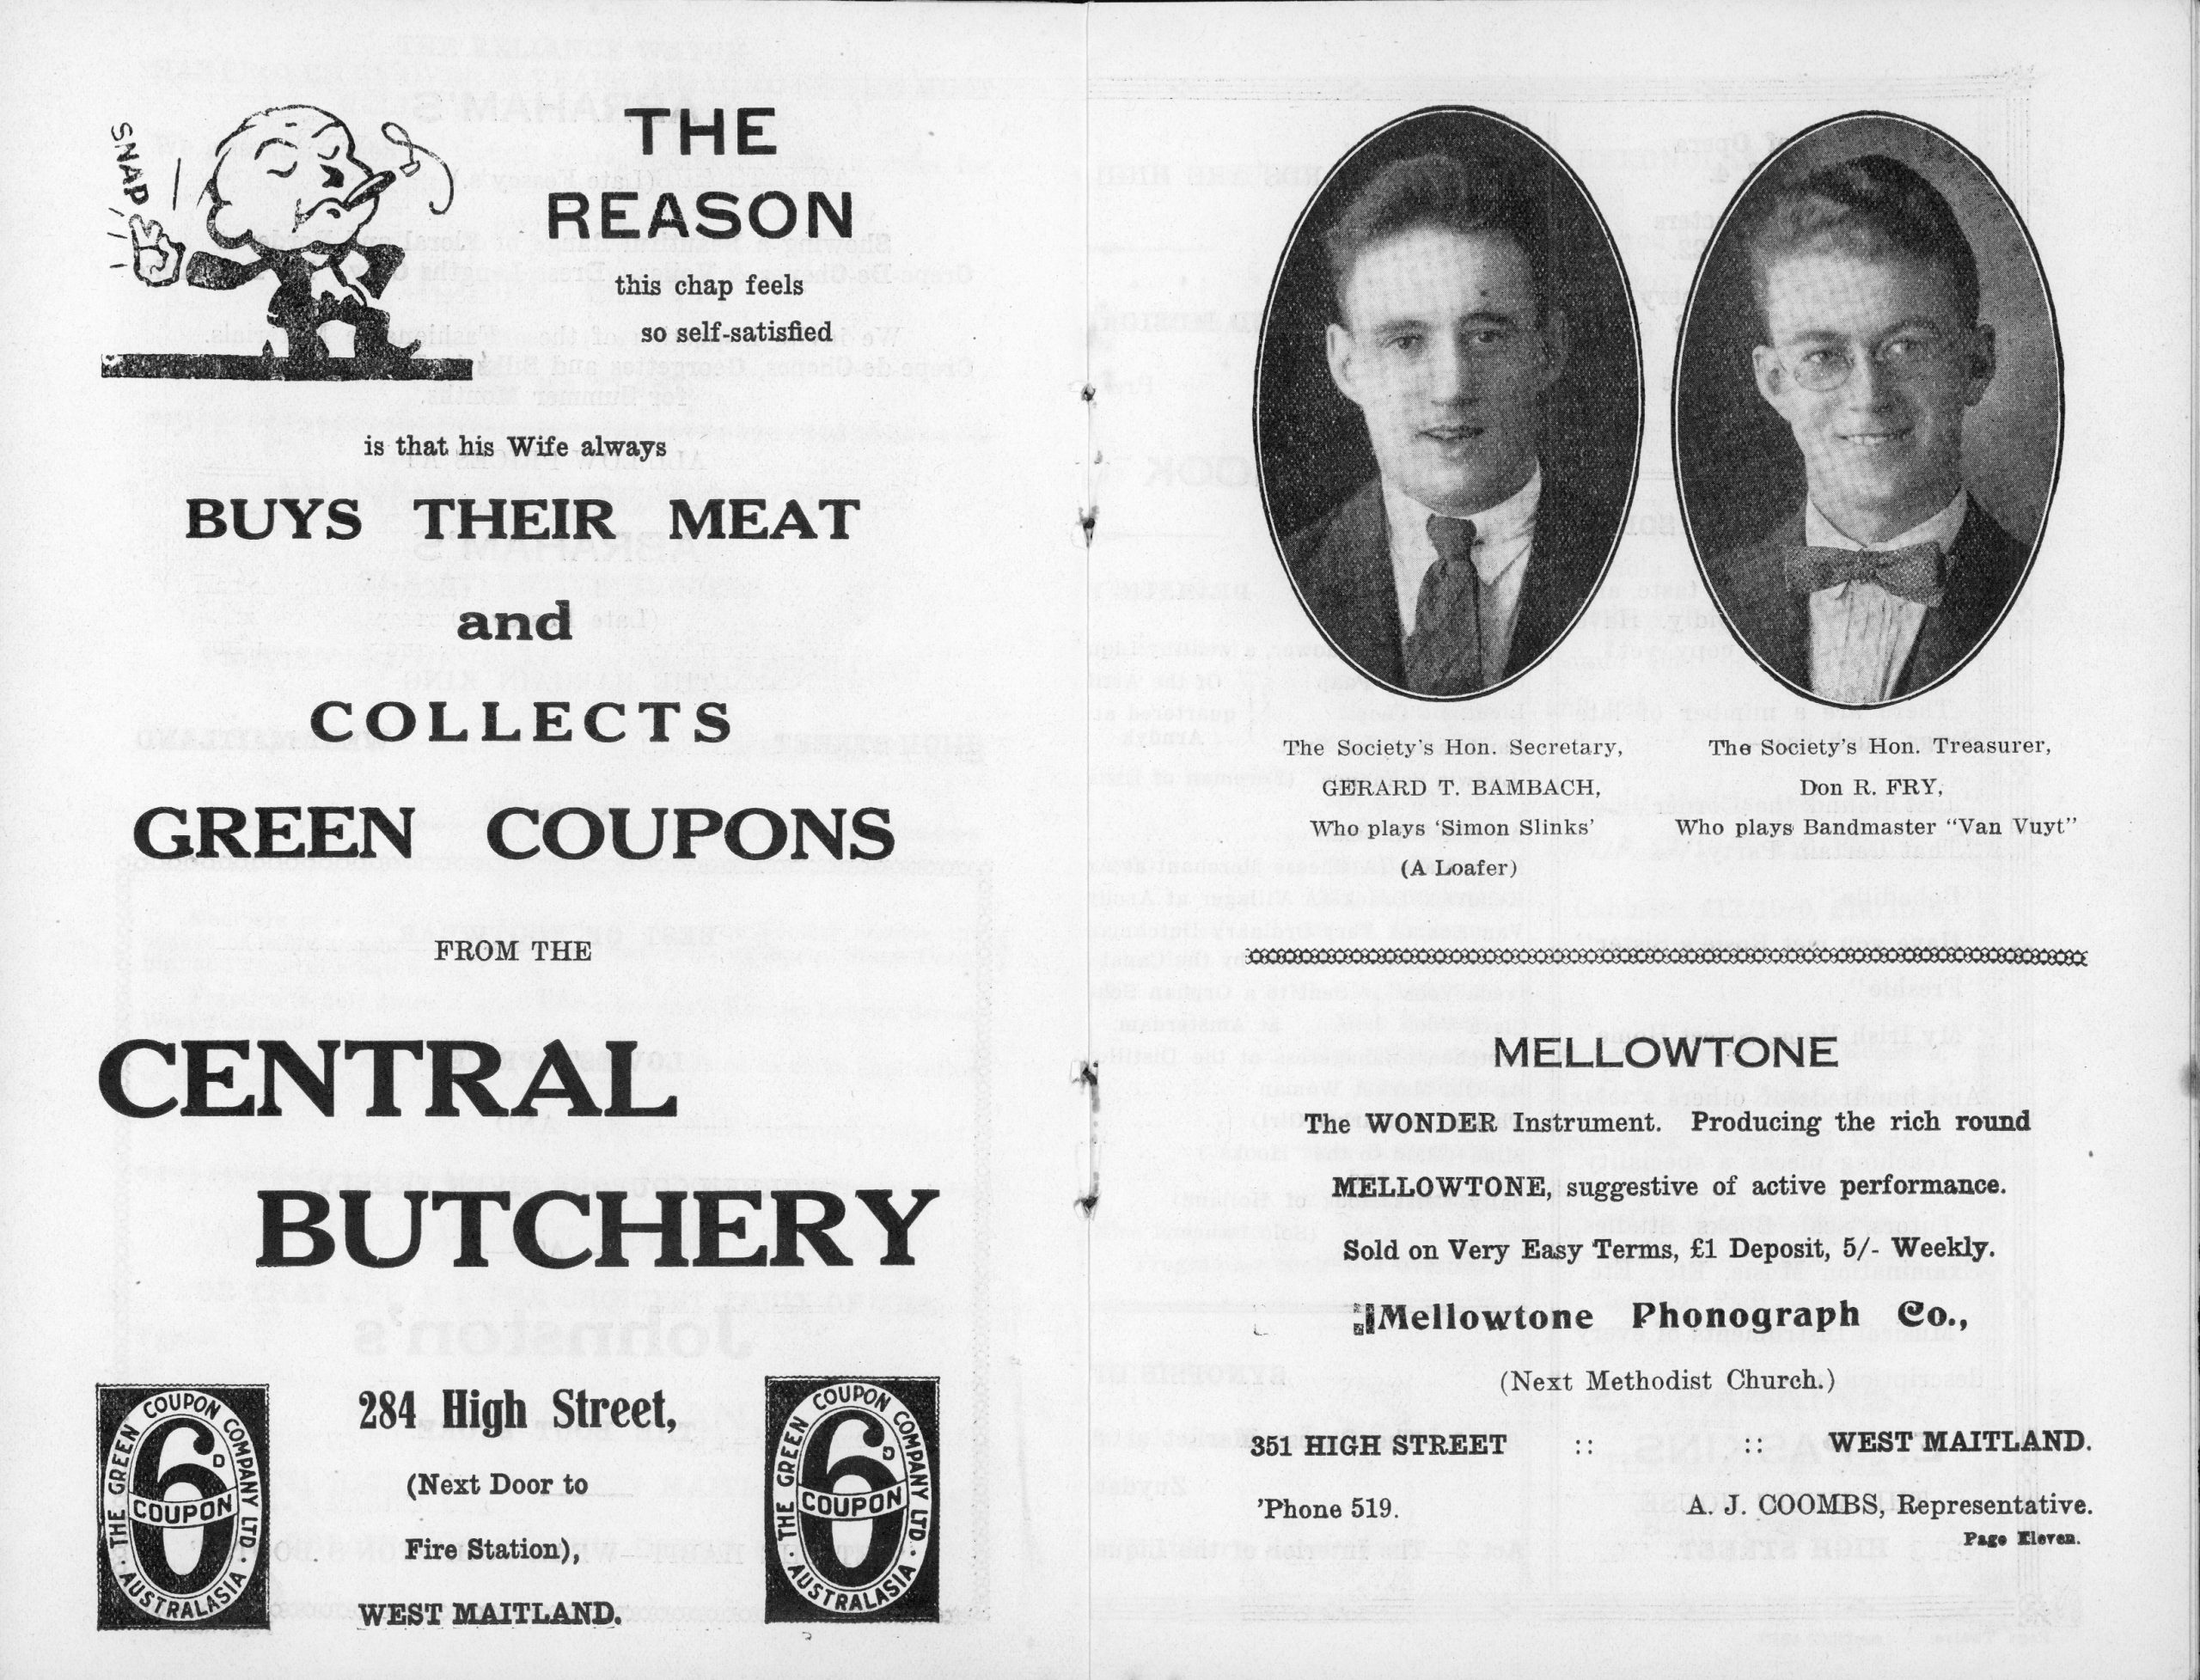 Text advertisement for "Central Butchery" in West Maitland alongside two photographs of Society secretaries, Gerard T. Bambach and Don R. Fry, who also appear in the show. Both wear suits, one dons a tie while the other a bowtie and spectacles.